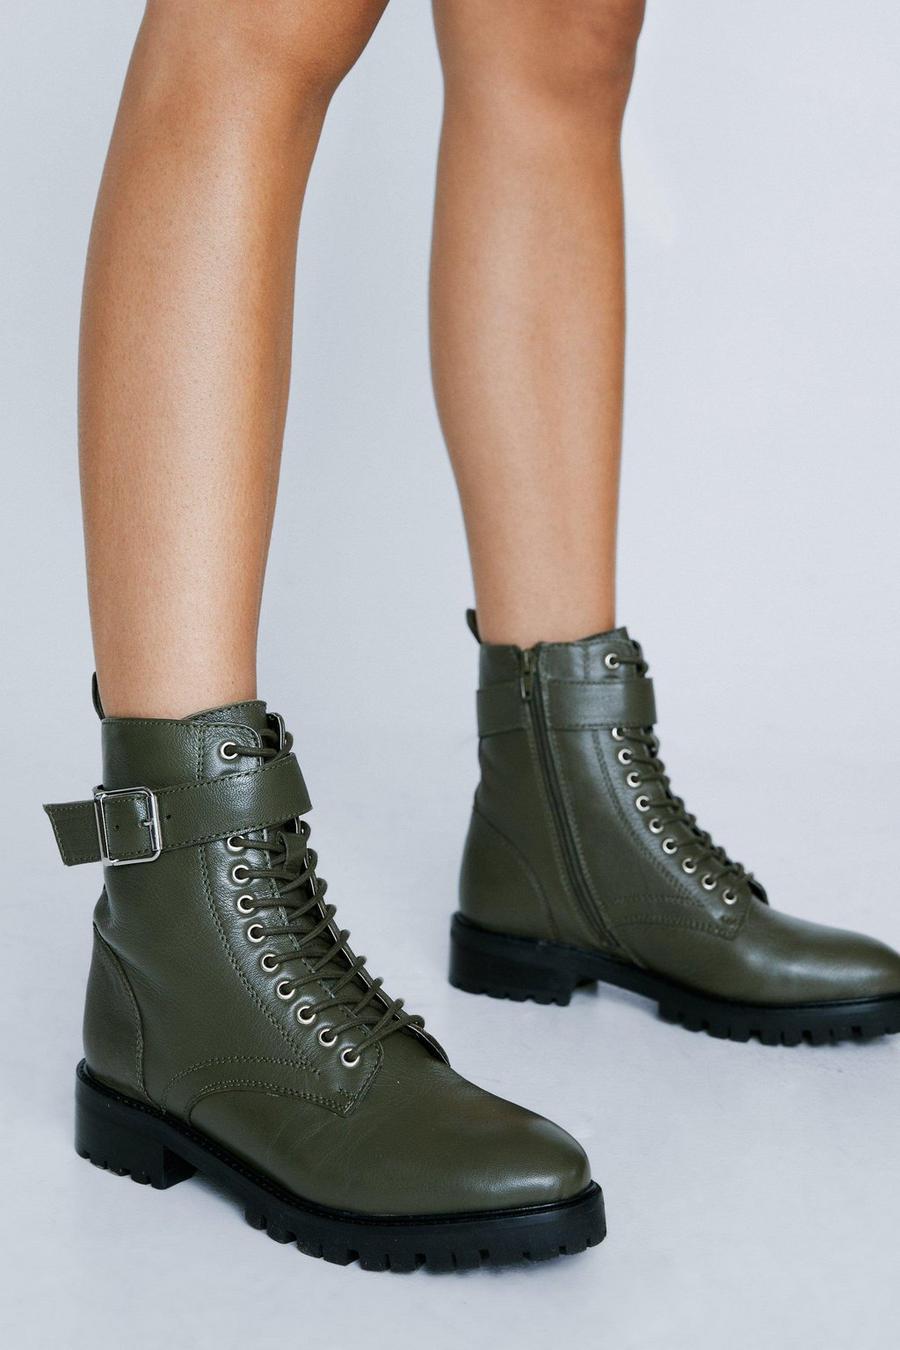 Khaki Real Leather Lace Up Cleated Combat Boots